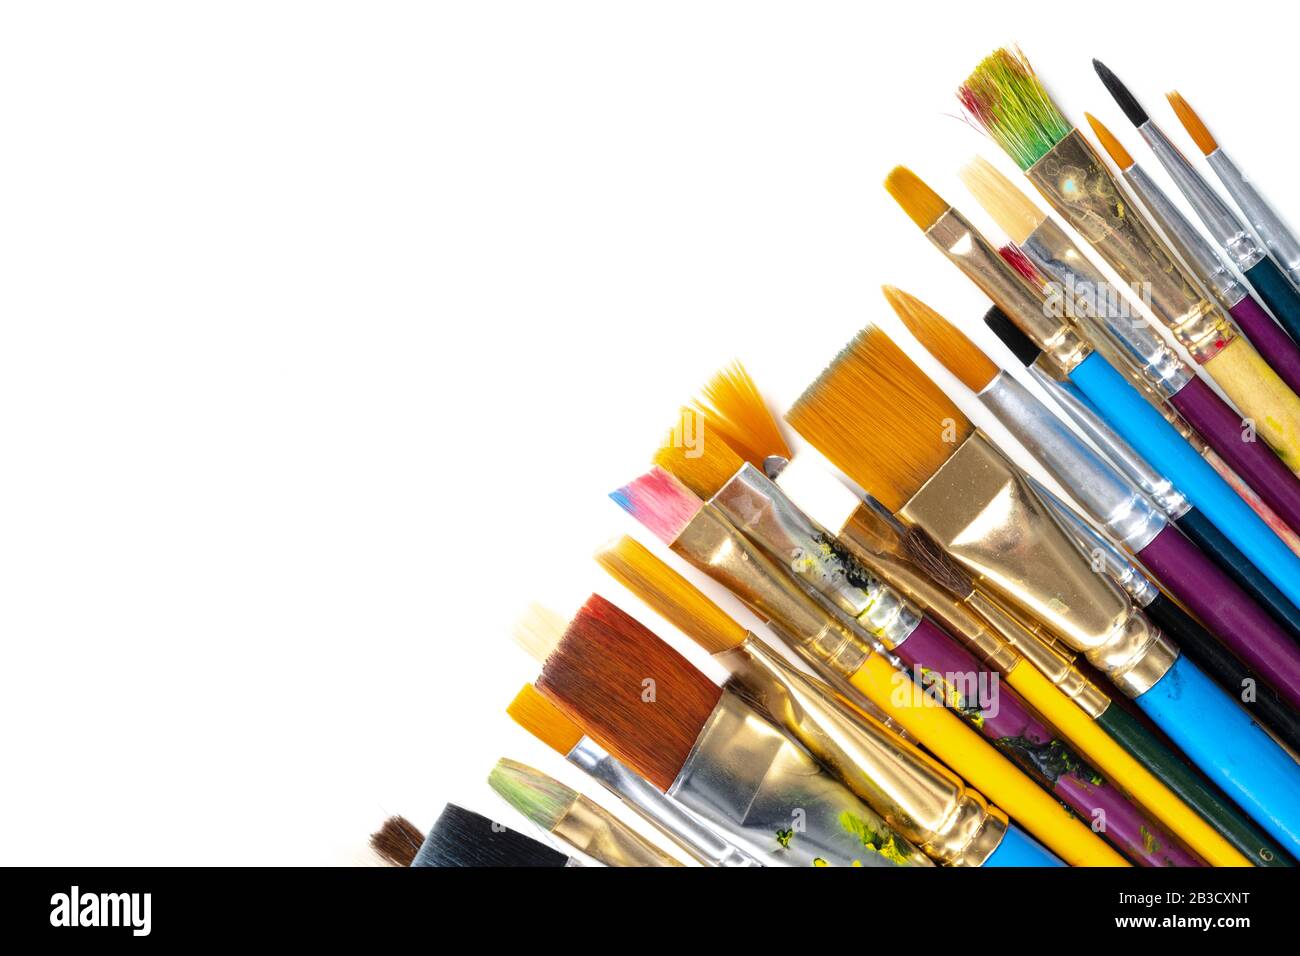 A collection of artists paint brushes on a white background Stock Photo